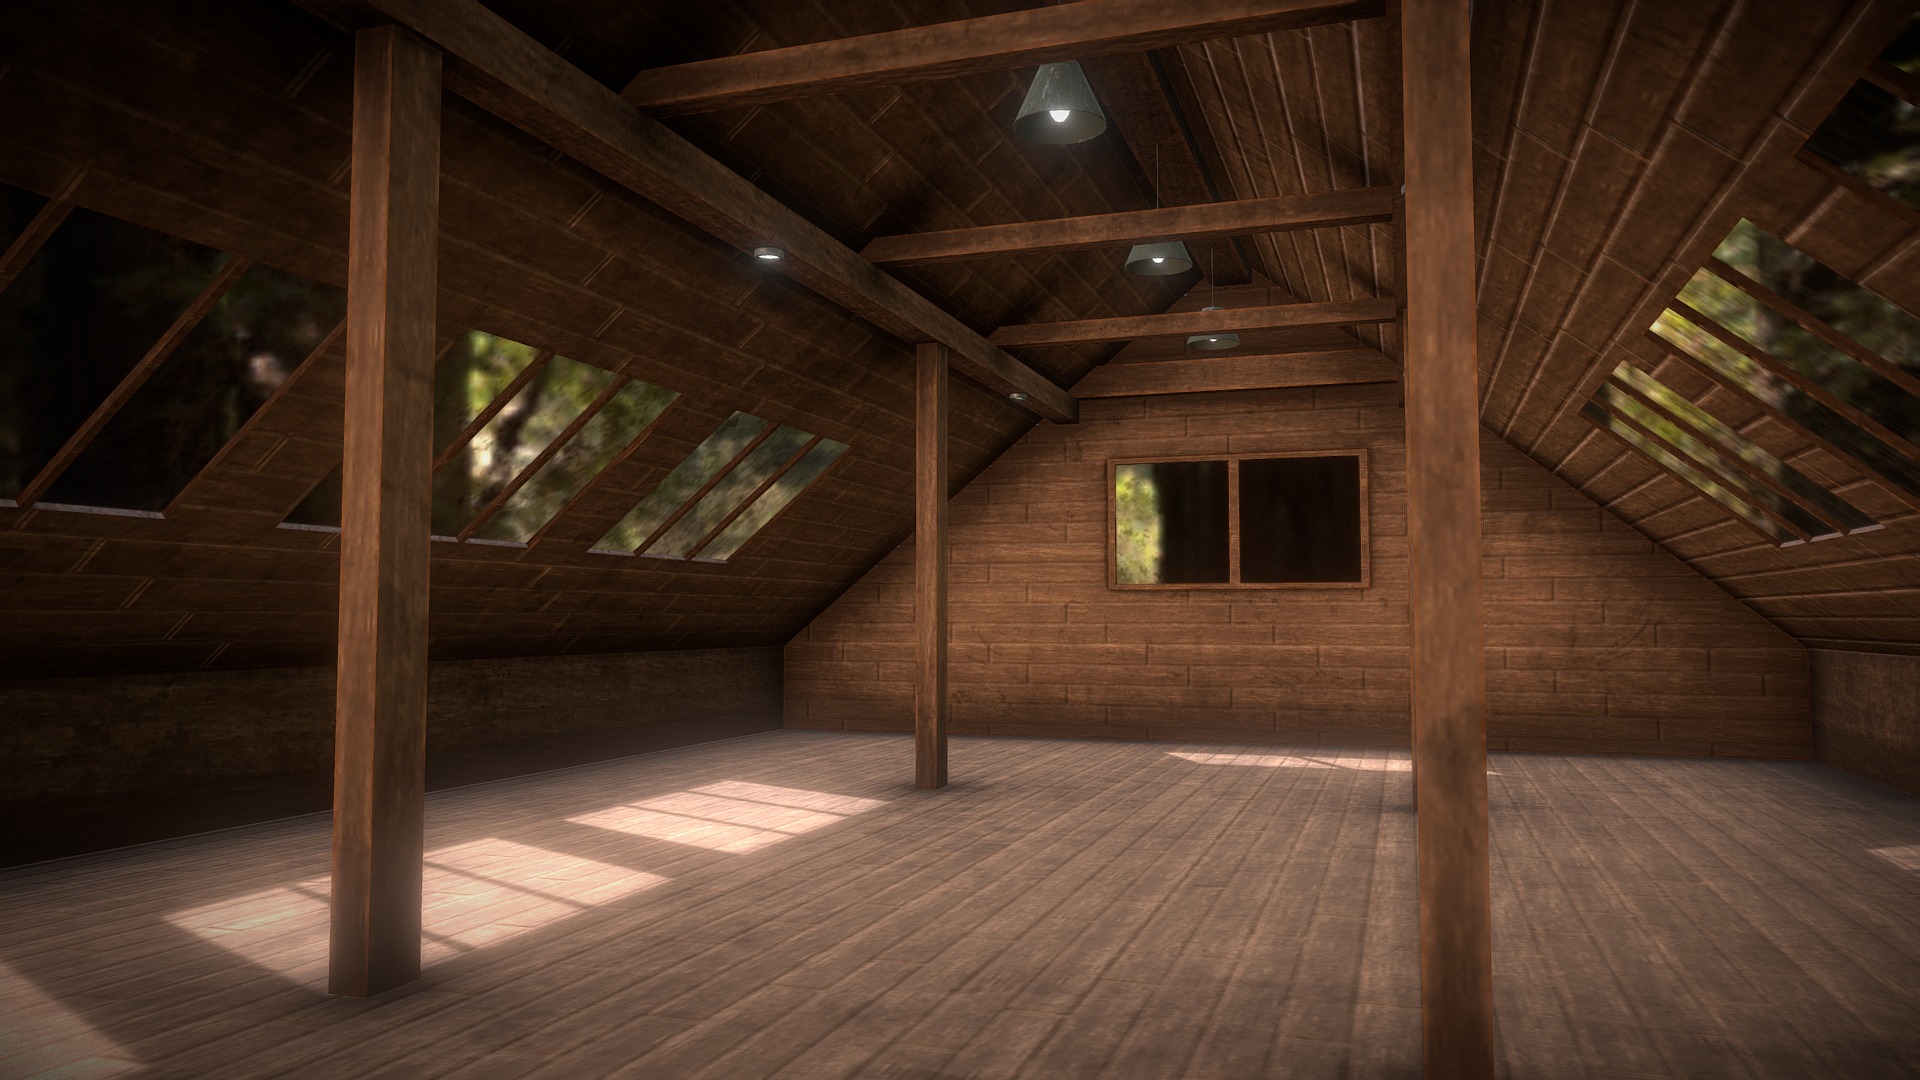 3D model Woodhouse - This is a 3D model of the Woodhouse. The 3D model is about a wooden cabin with a wood floor.